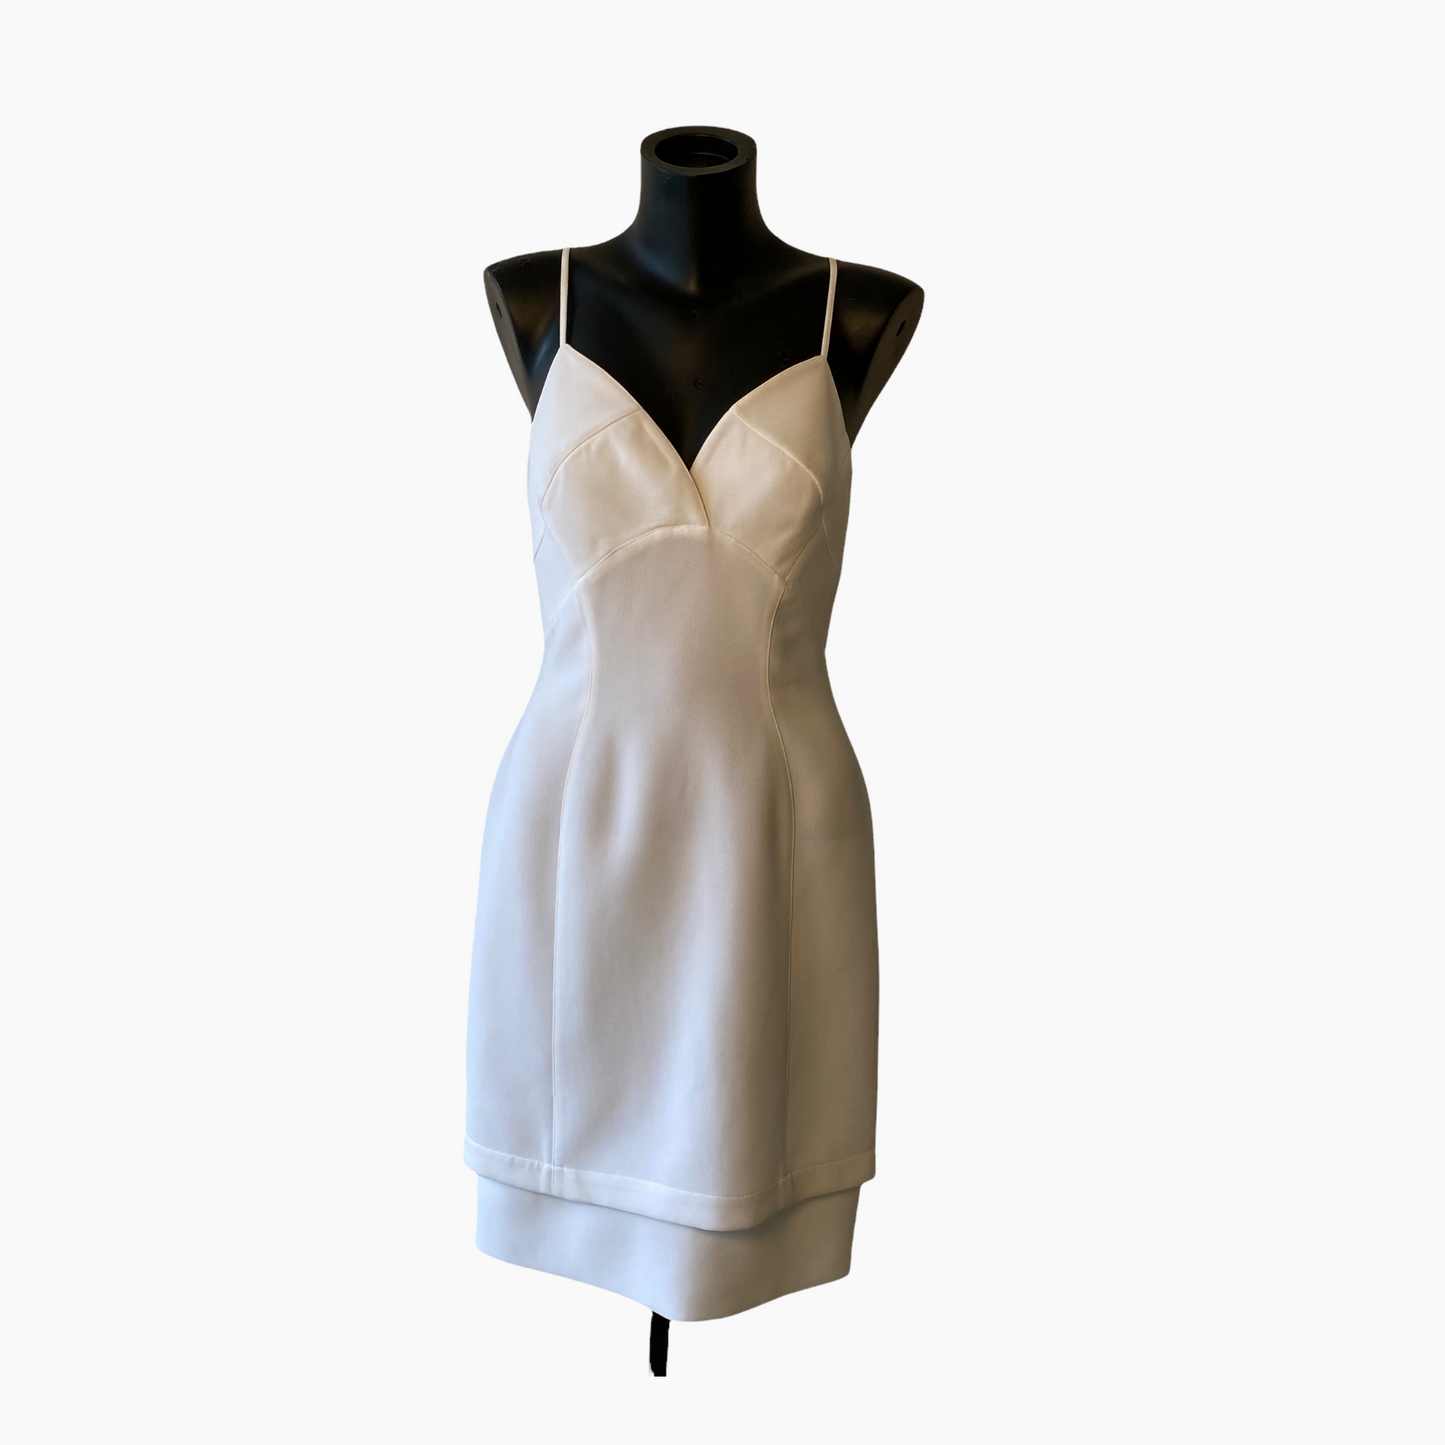 Lysis vintage Thierry Mugler white vintage dress with straps - S - 1990s